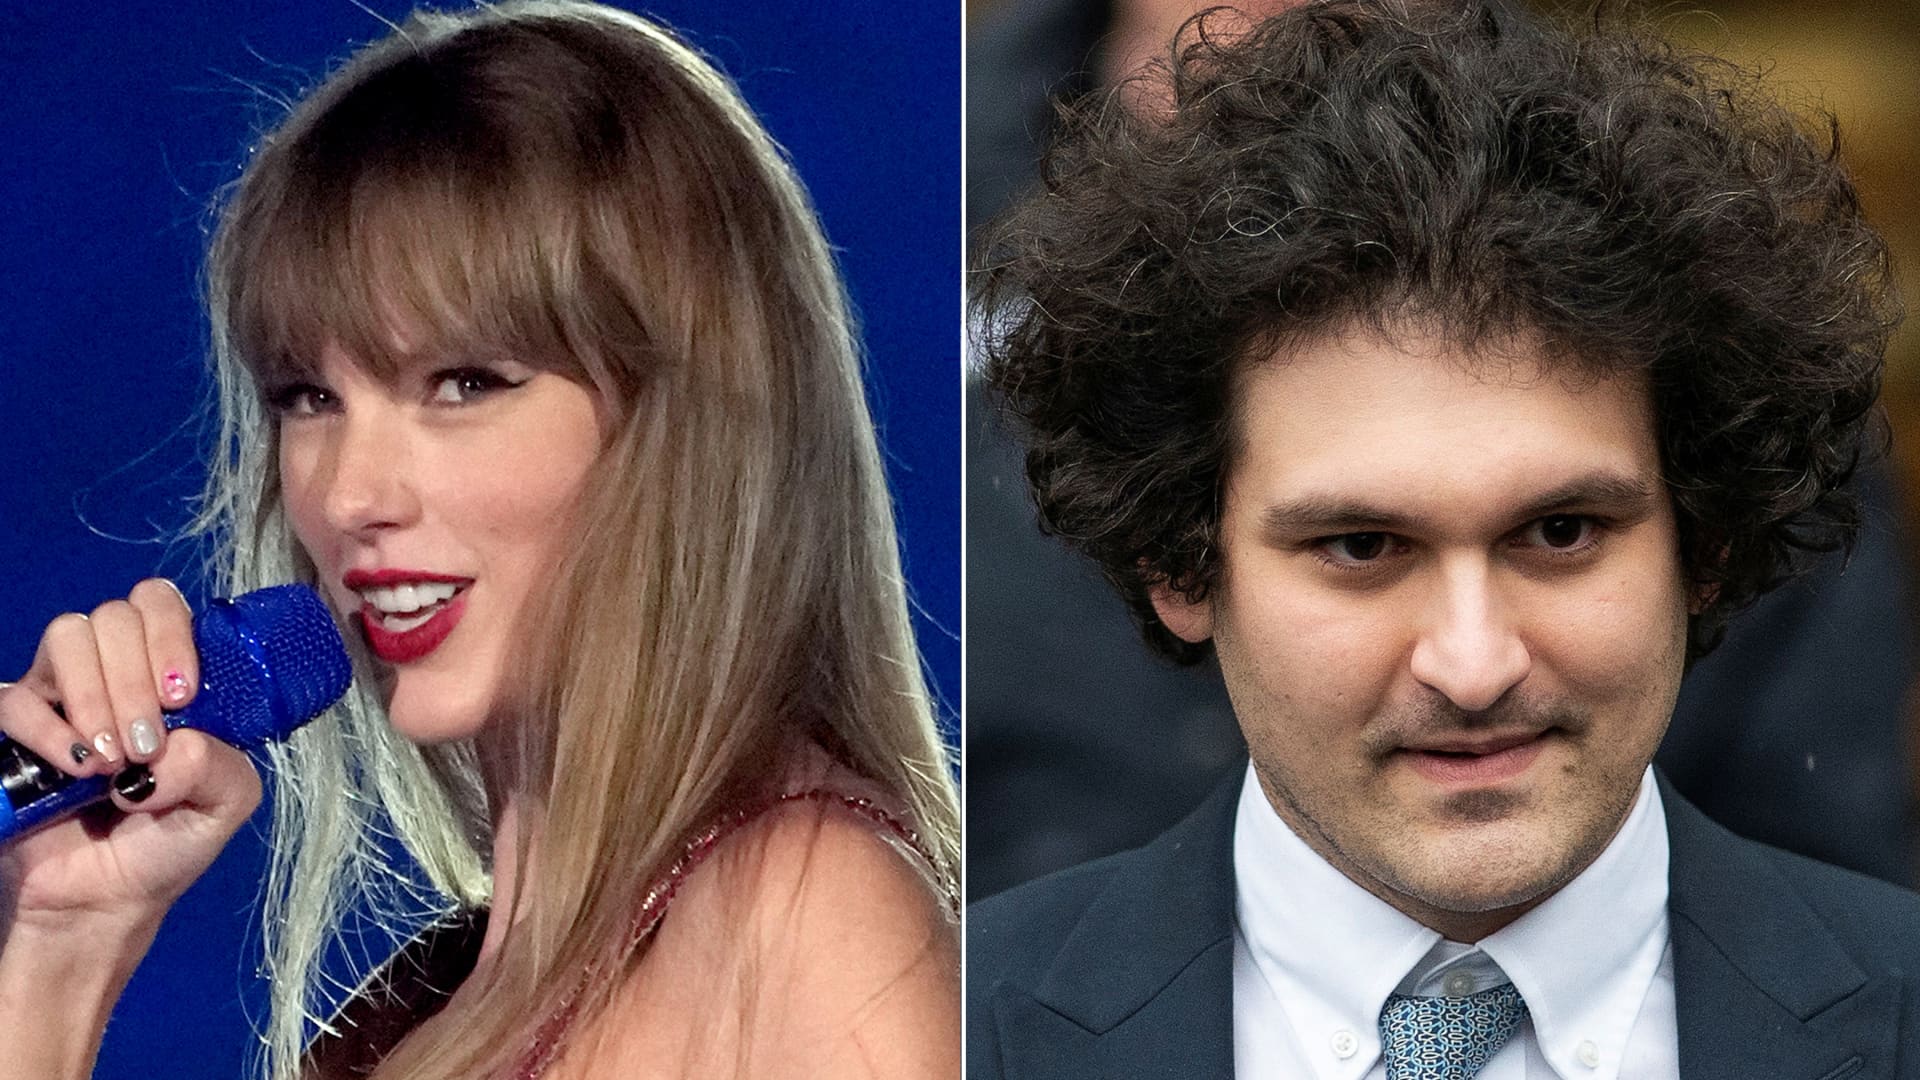 Taylor Swift agreed to FTX partnership, but the crypto exchange bailed, source tells CNBC